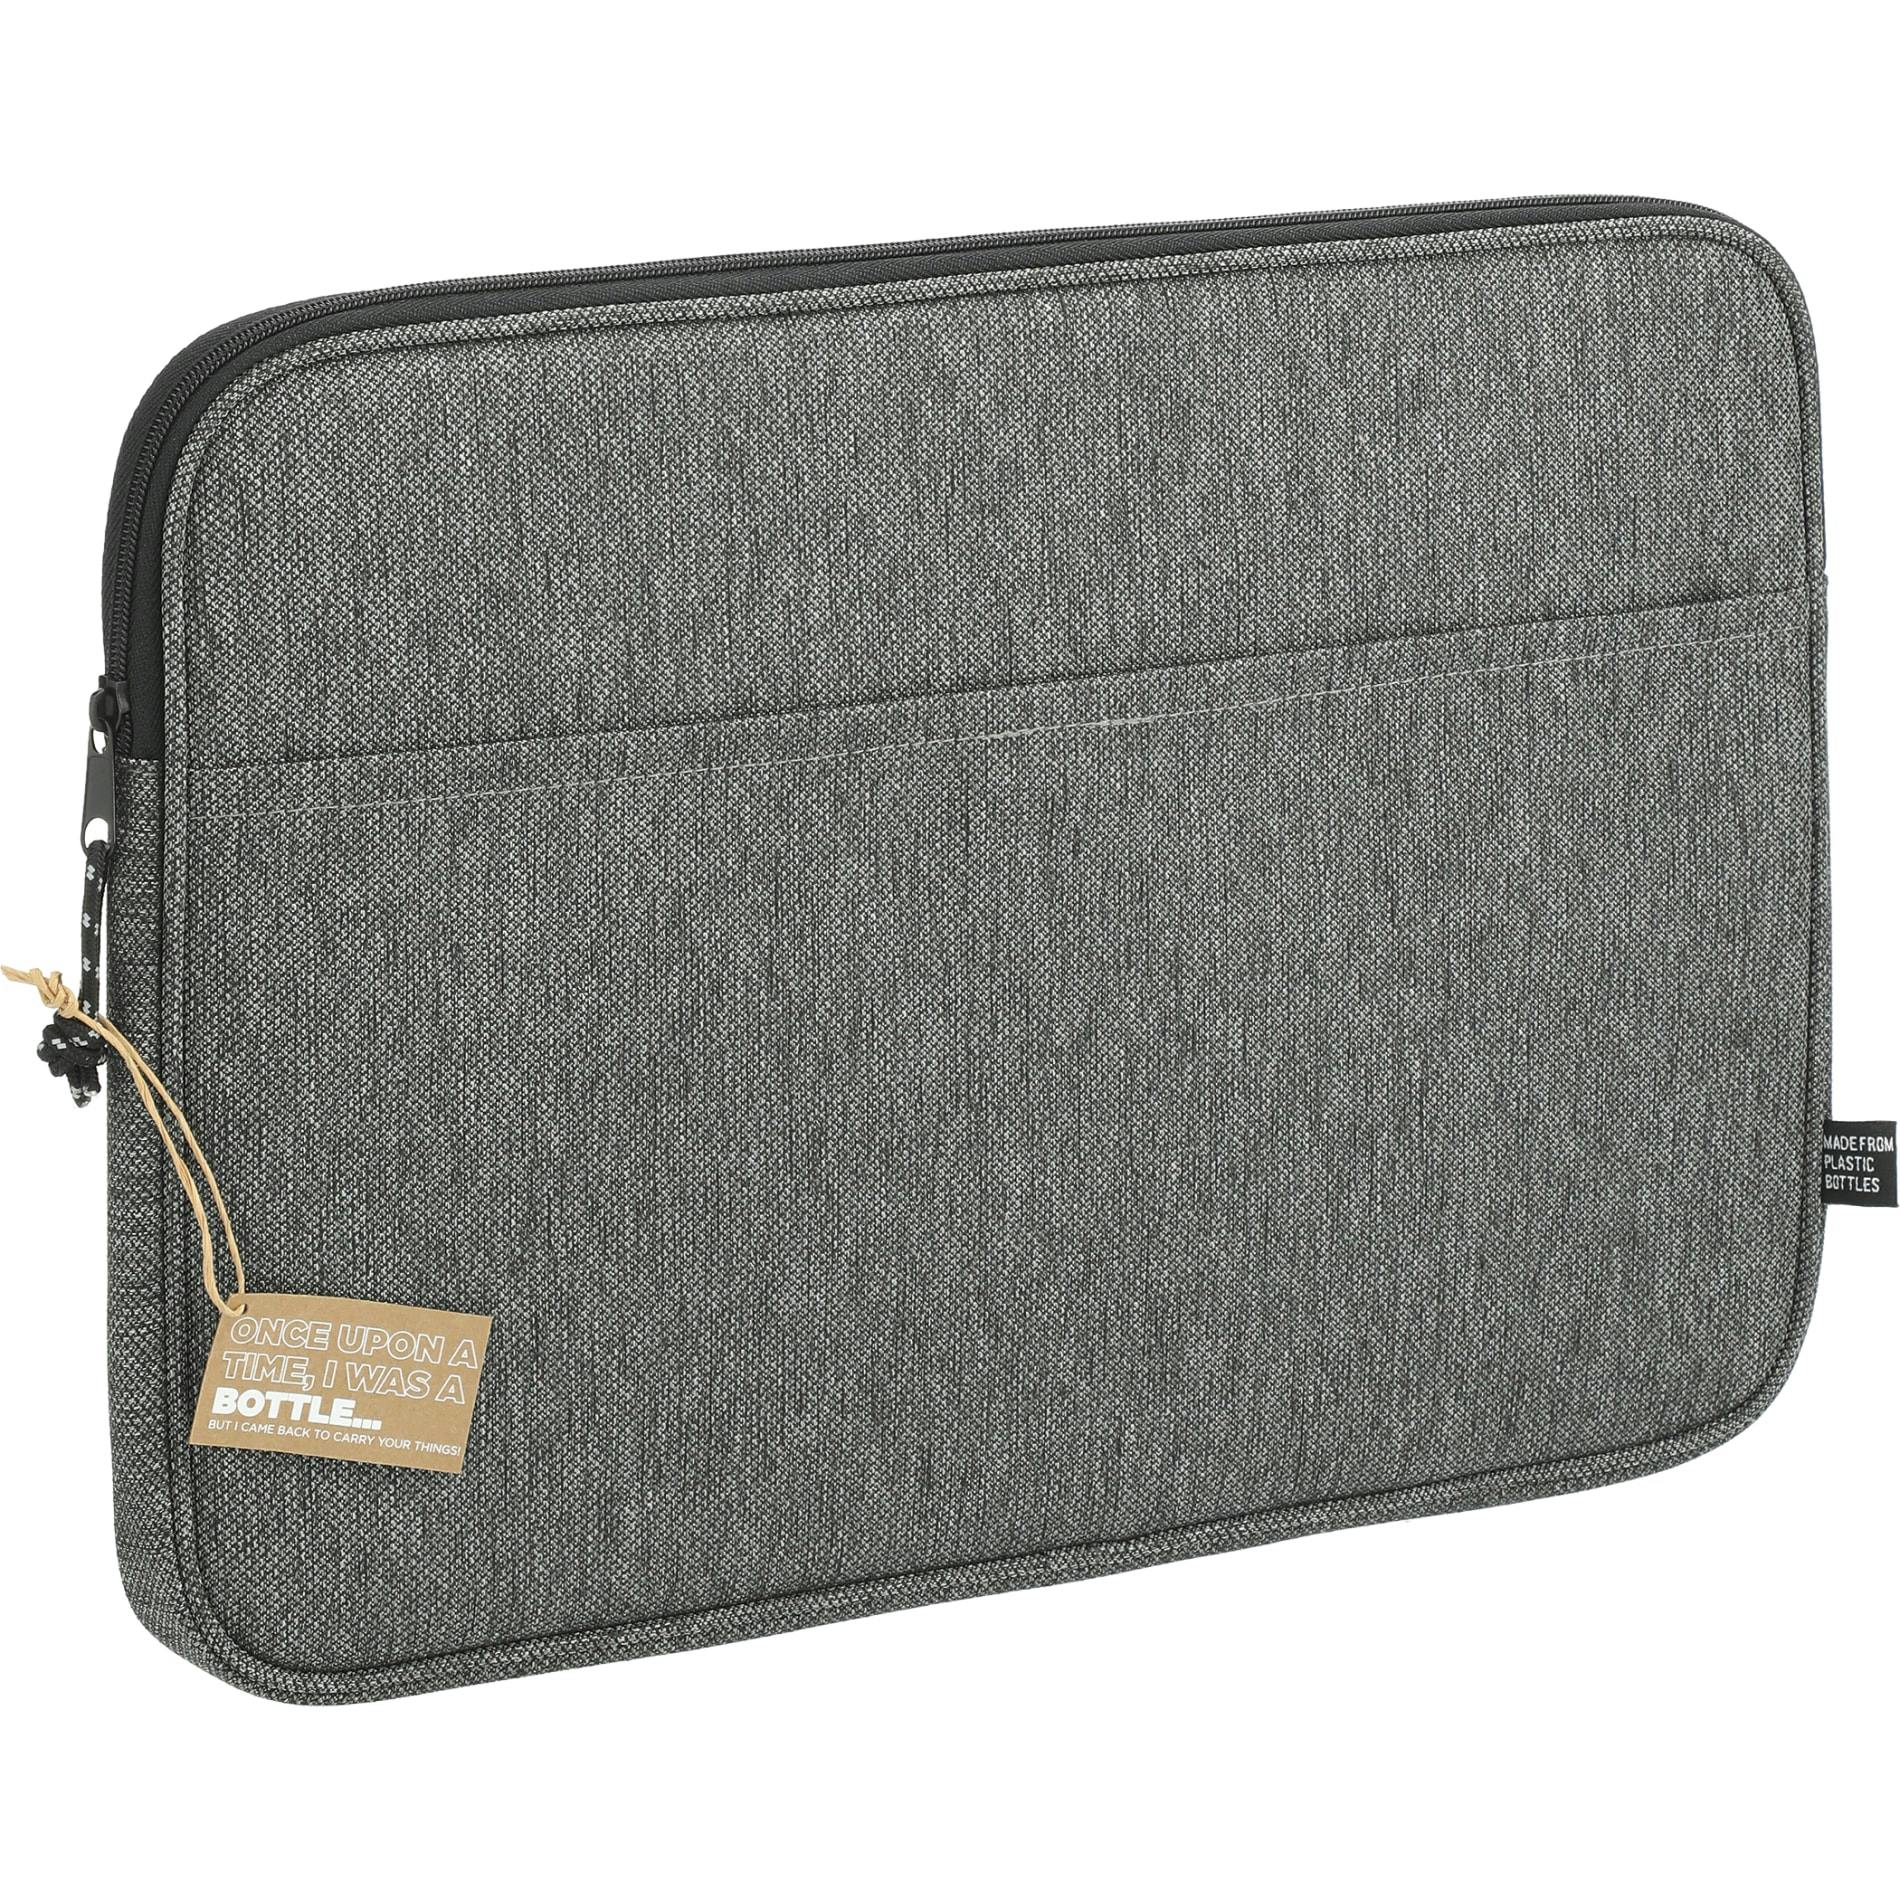 Vila Recycled 15" Computer Sleeve - additional Image 1